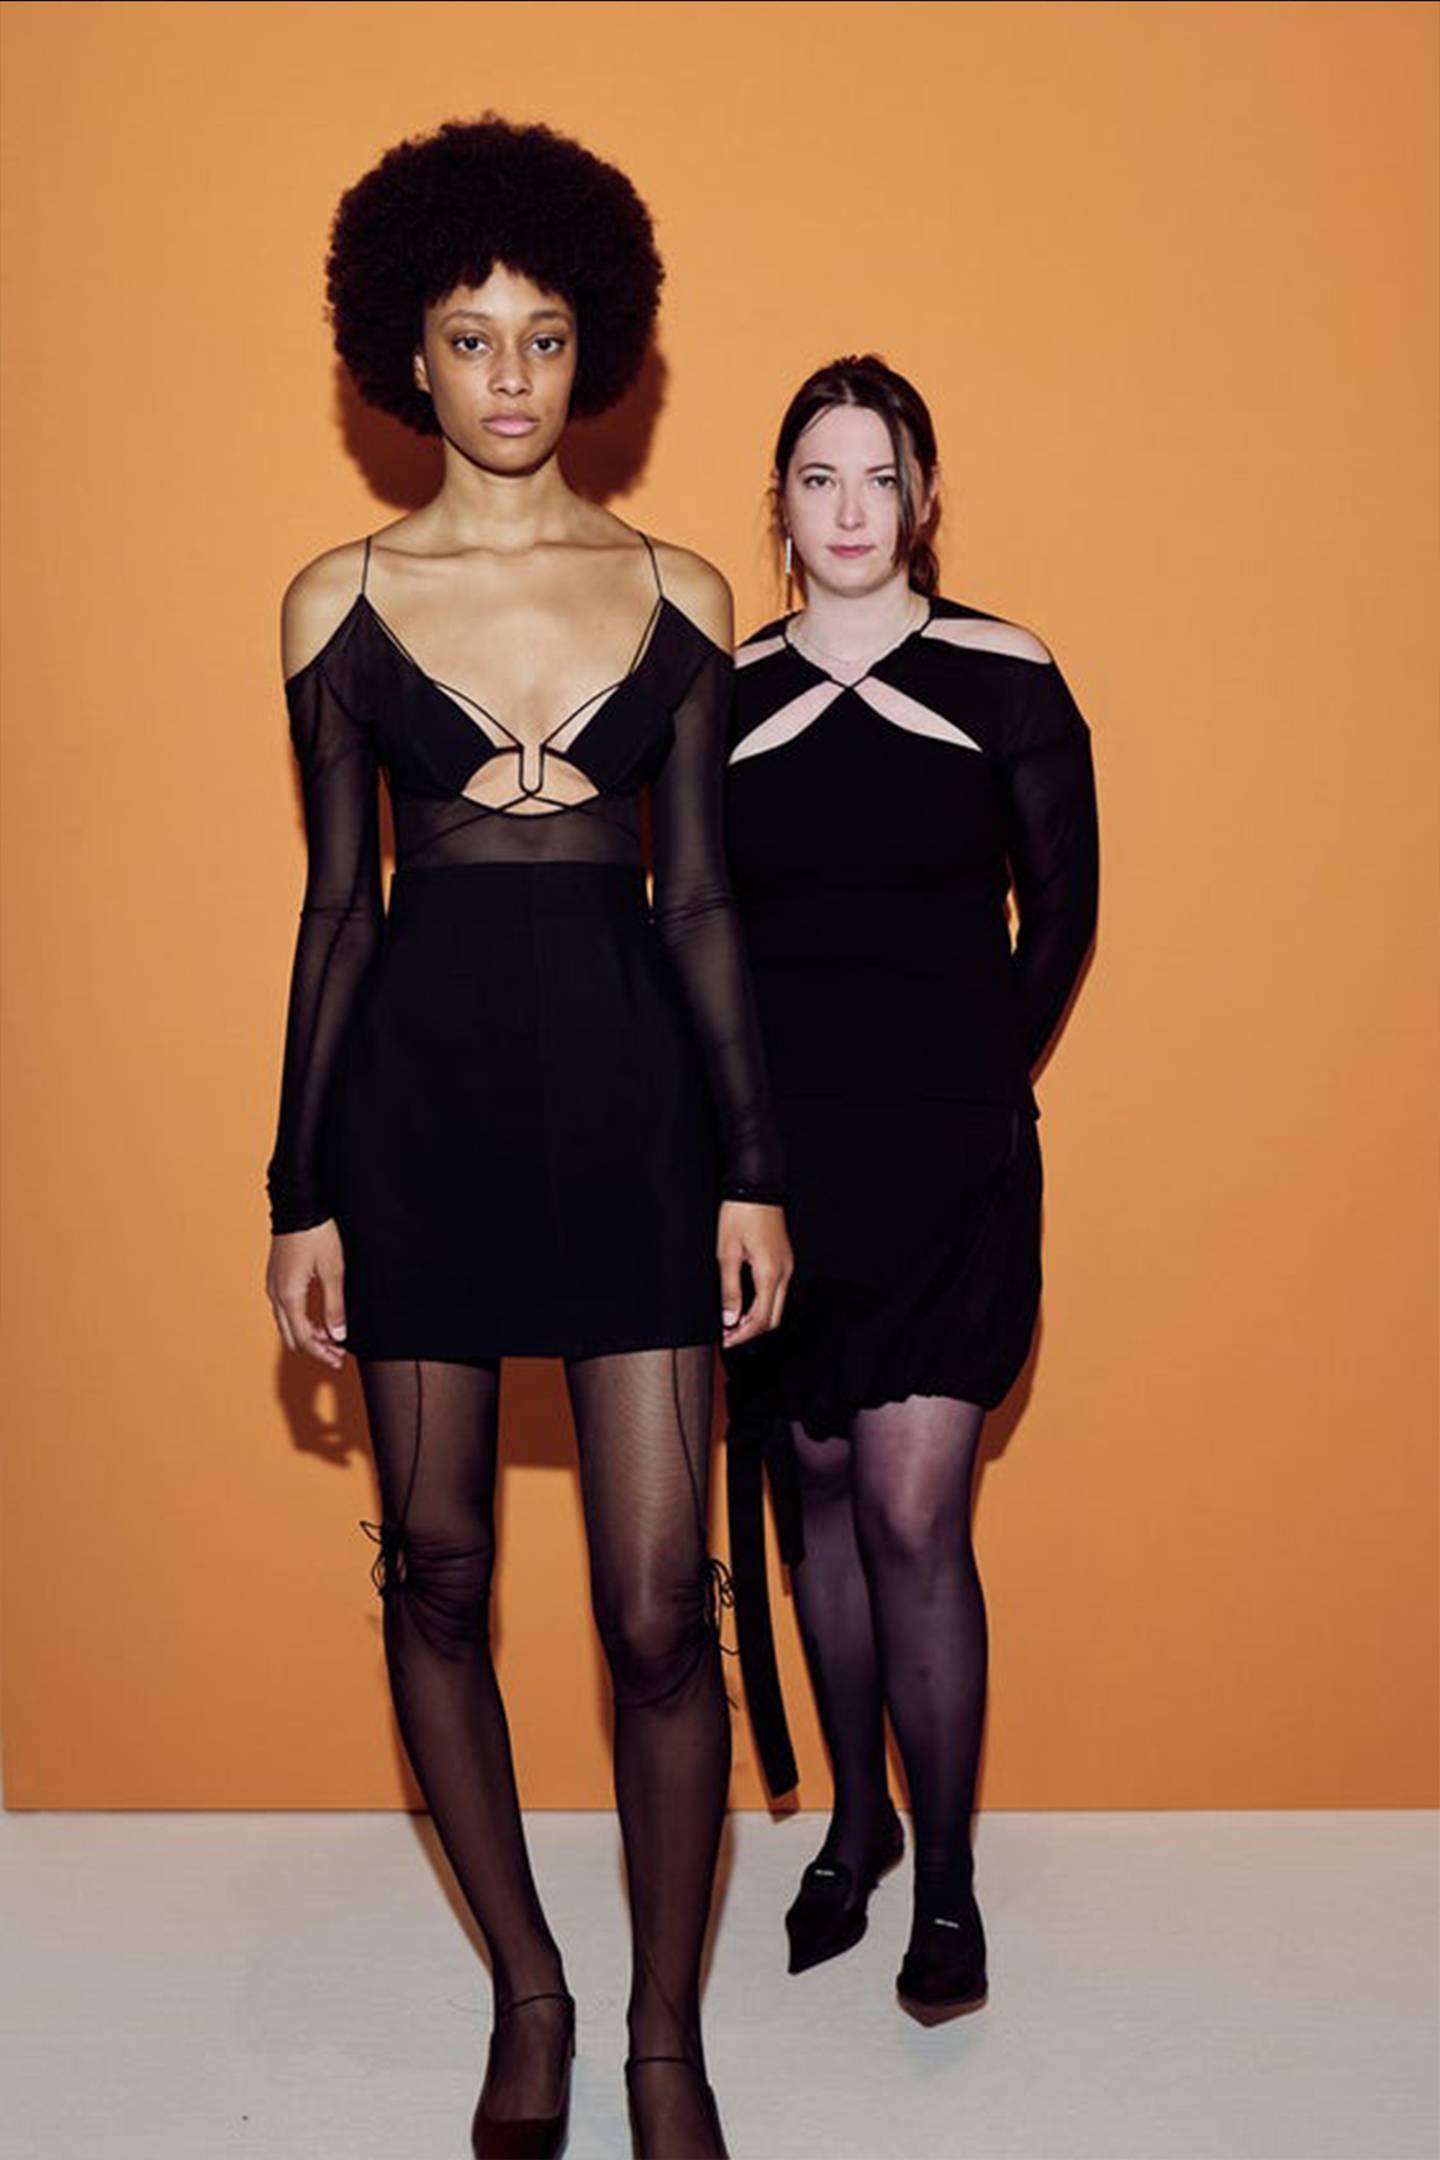 Nensi Dojaka, right, at the LVMH Prize event alongside a model sporting her Autumn/Winter 2021 collection. LVMH.